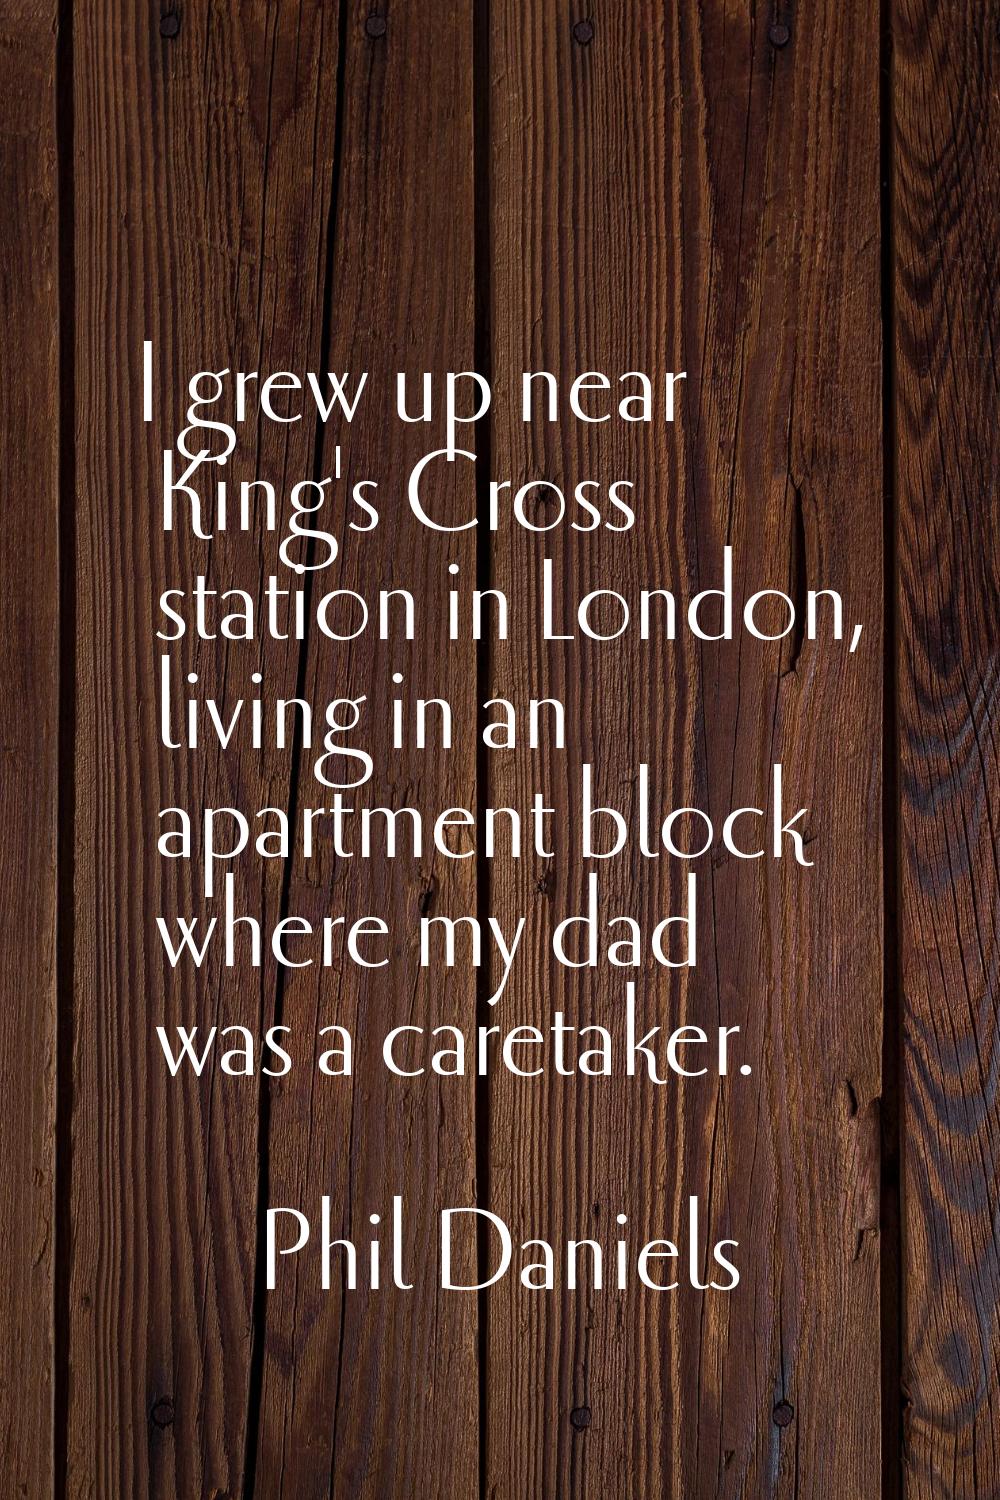 I grew up near King's Cross station in London, living in an apartment block where my dad was a care